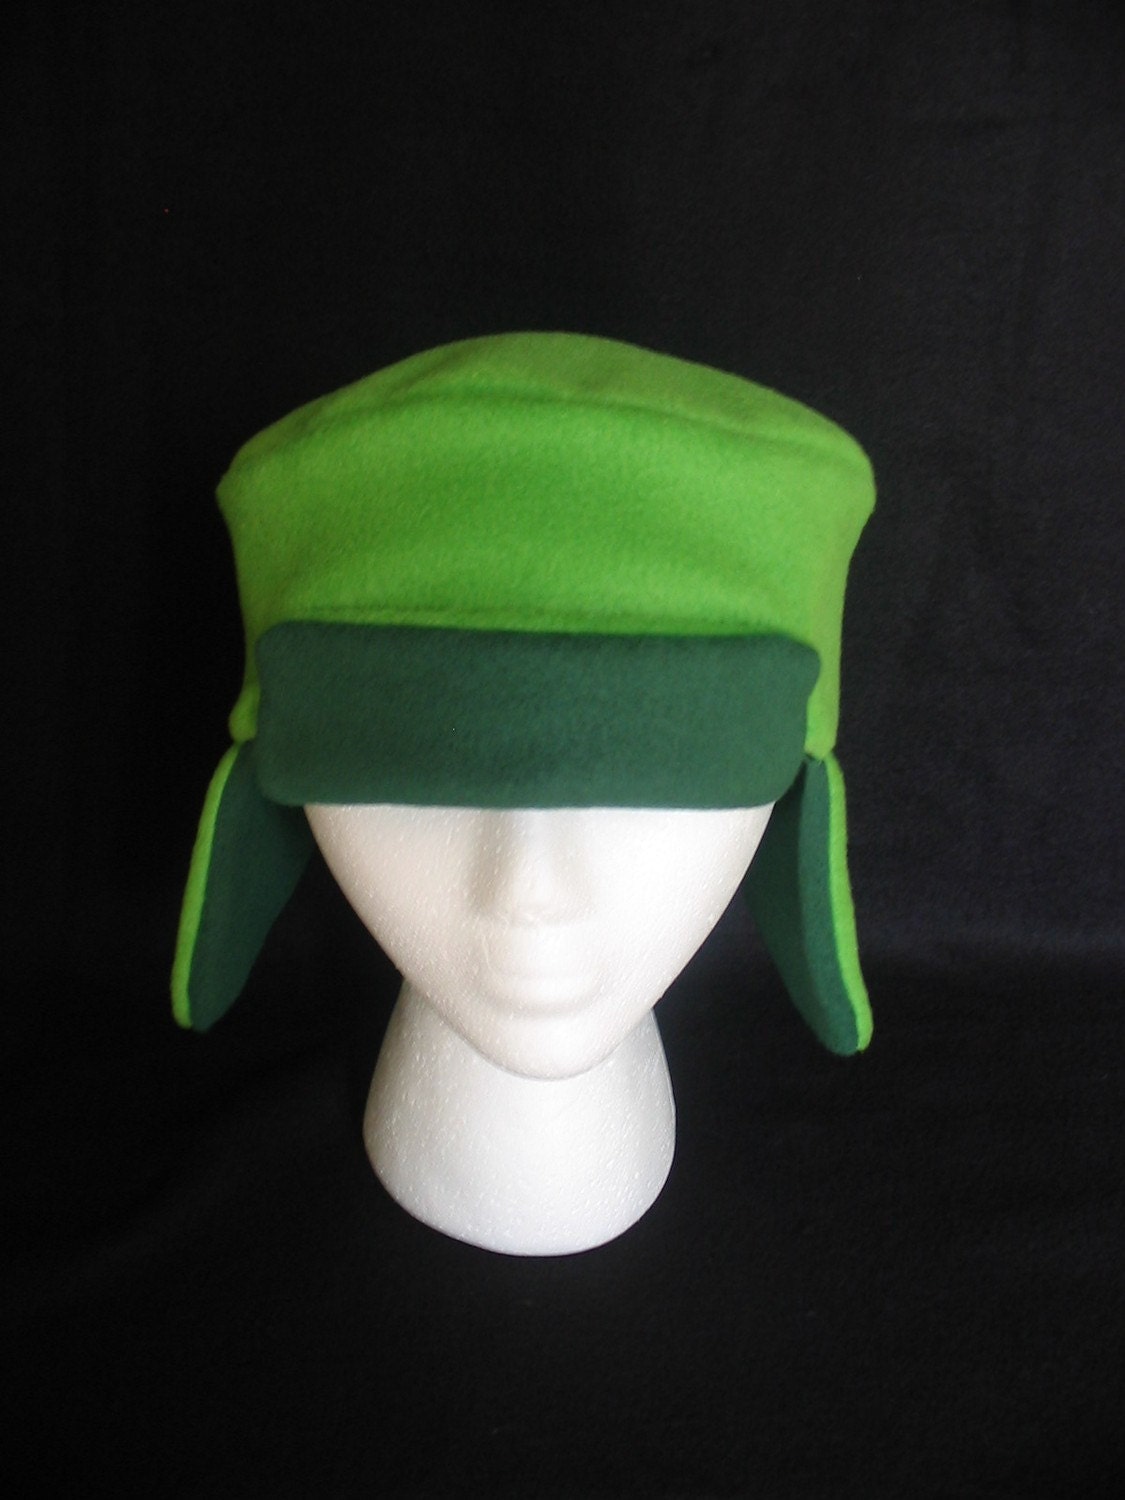 Cosplay South Park Inspired Green Ushanka Character Kyle Style Hat